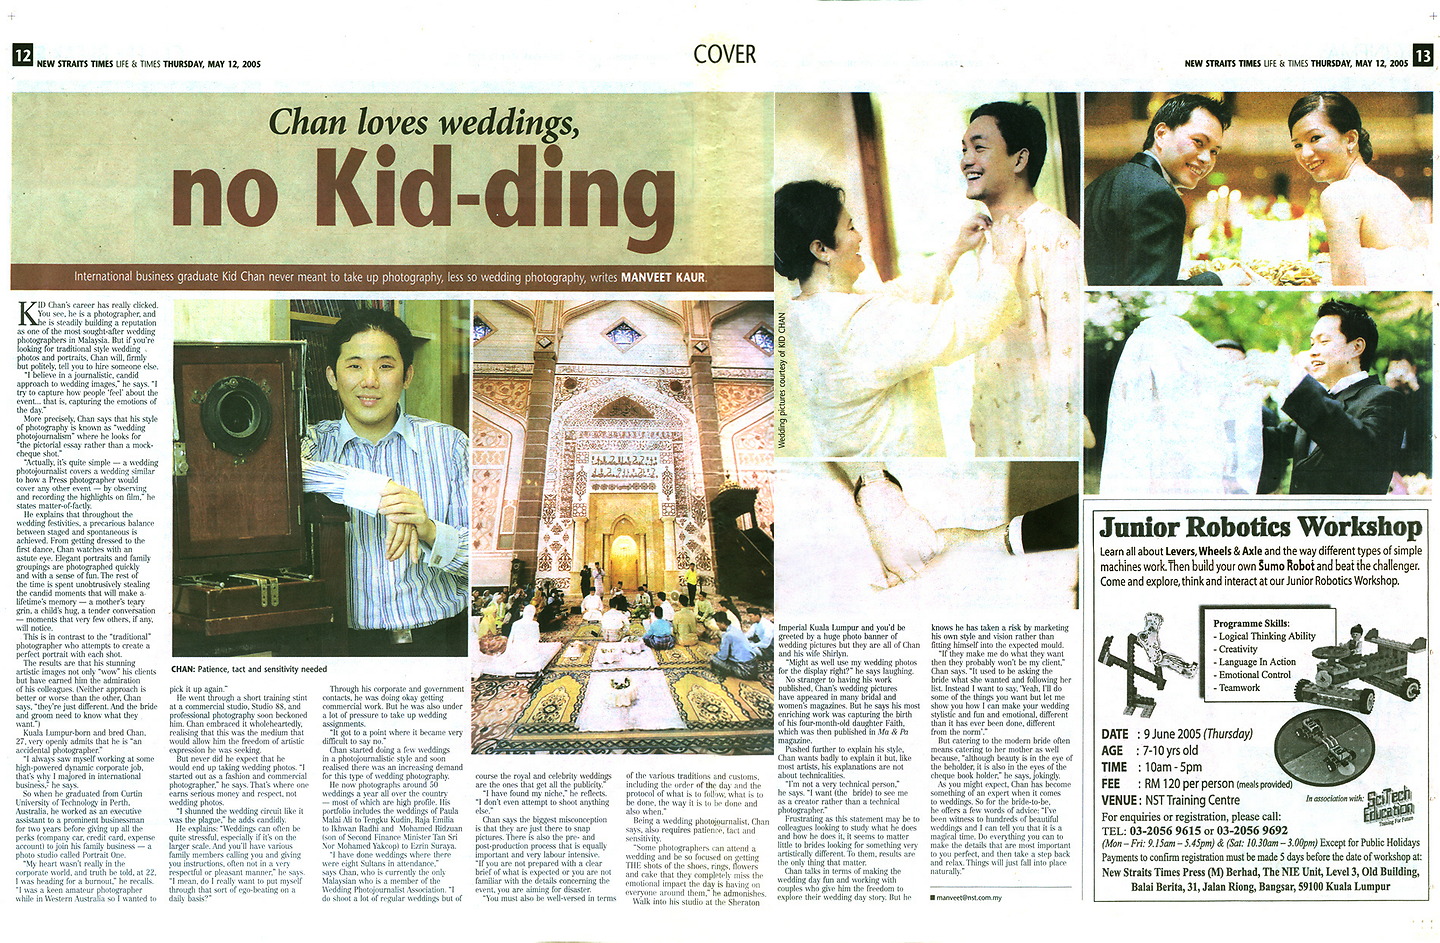 New Straits Times, Life & Times May 2005: 'Chan Loves Weddings, No Kid-ding'